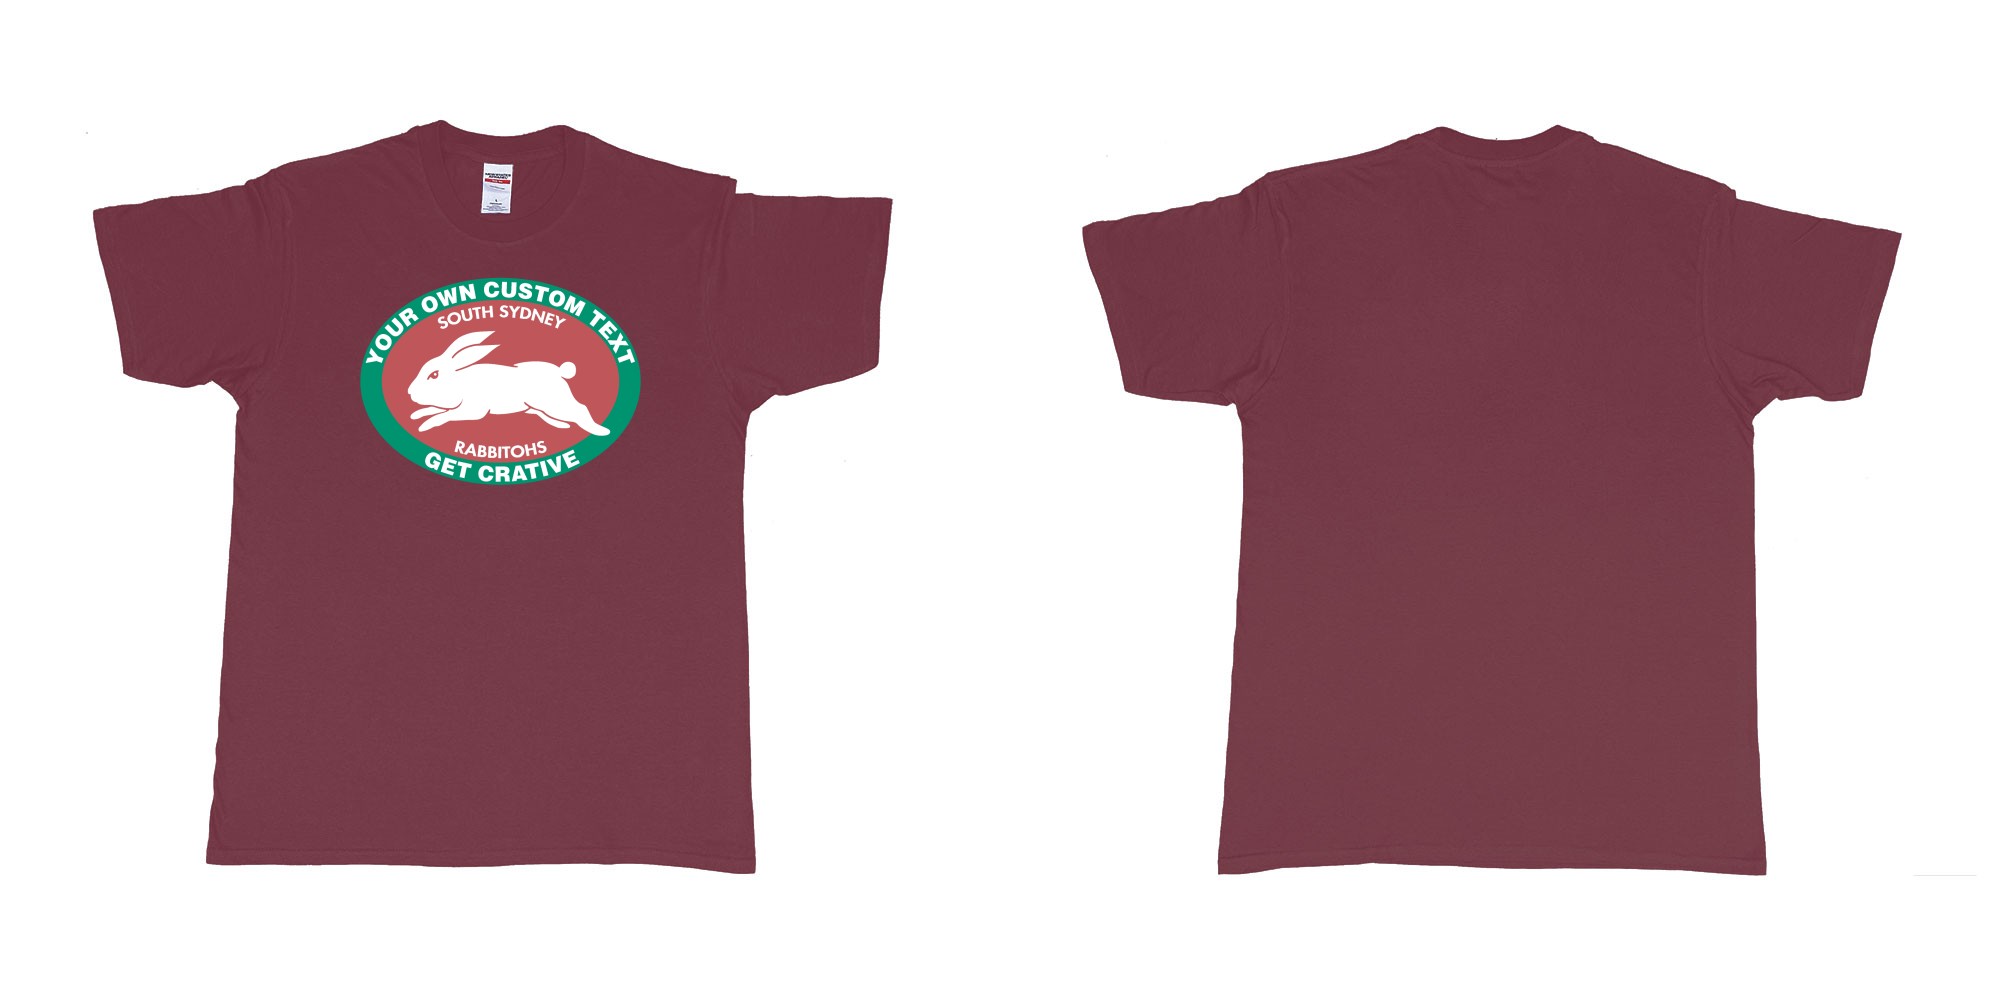 Custom tshirt design south sydney rabbitohs nrl custom print in fabric color marron choice your own text made in Bali by The Pirate Way